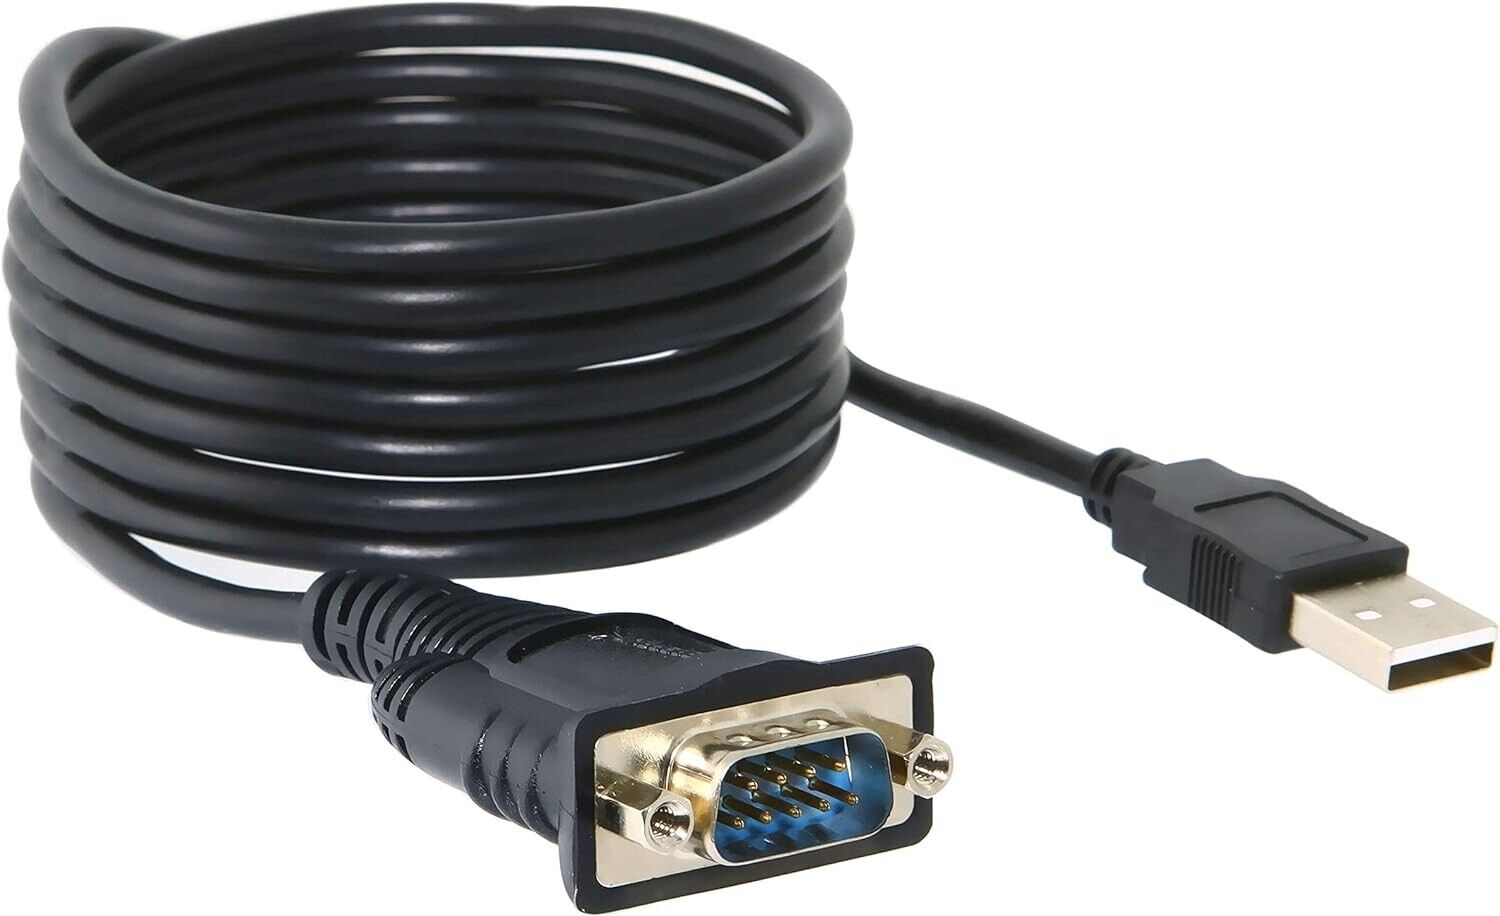 Sabrent SBT-FTDI 6Ft USB Type A to Male Serial 9 PIN DB9 RS232 Cable Black